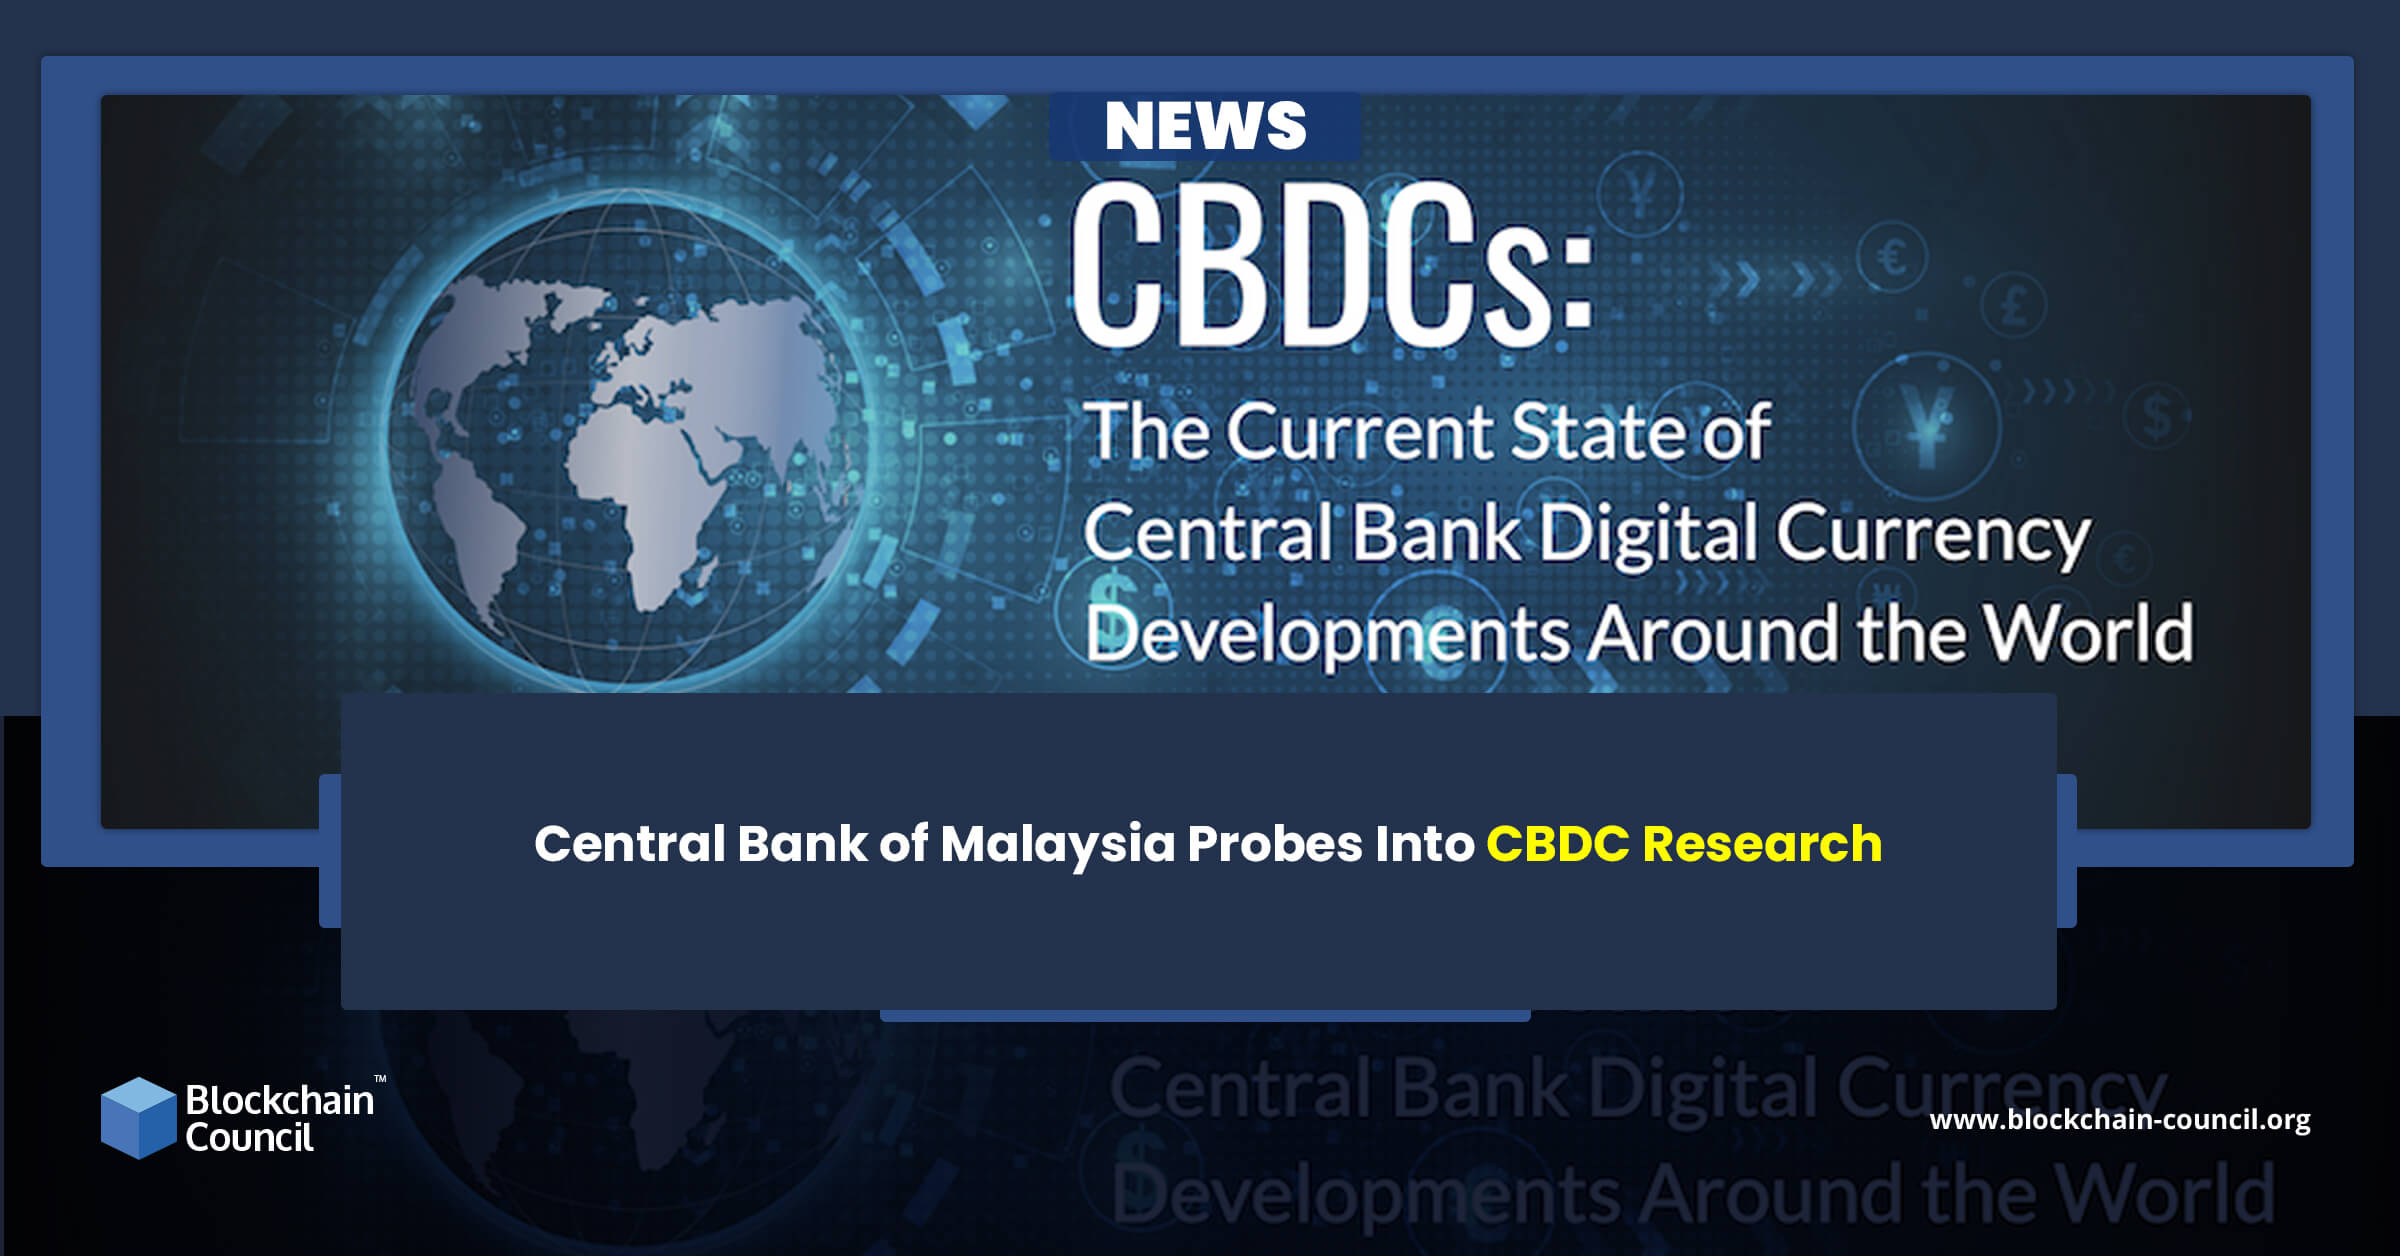 Central Bank of Malaysia Probes Into CBDC Research